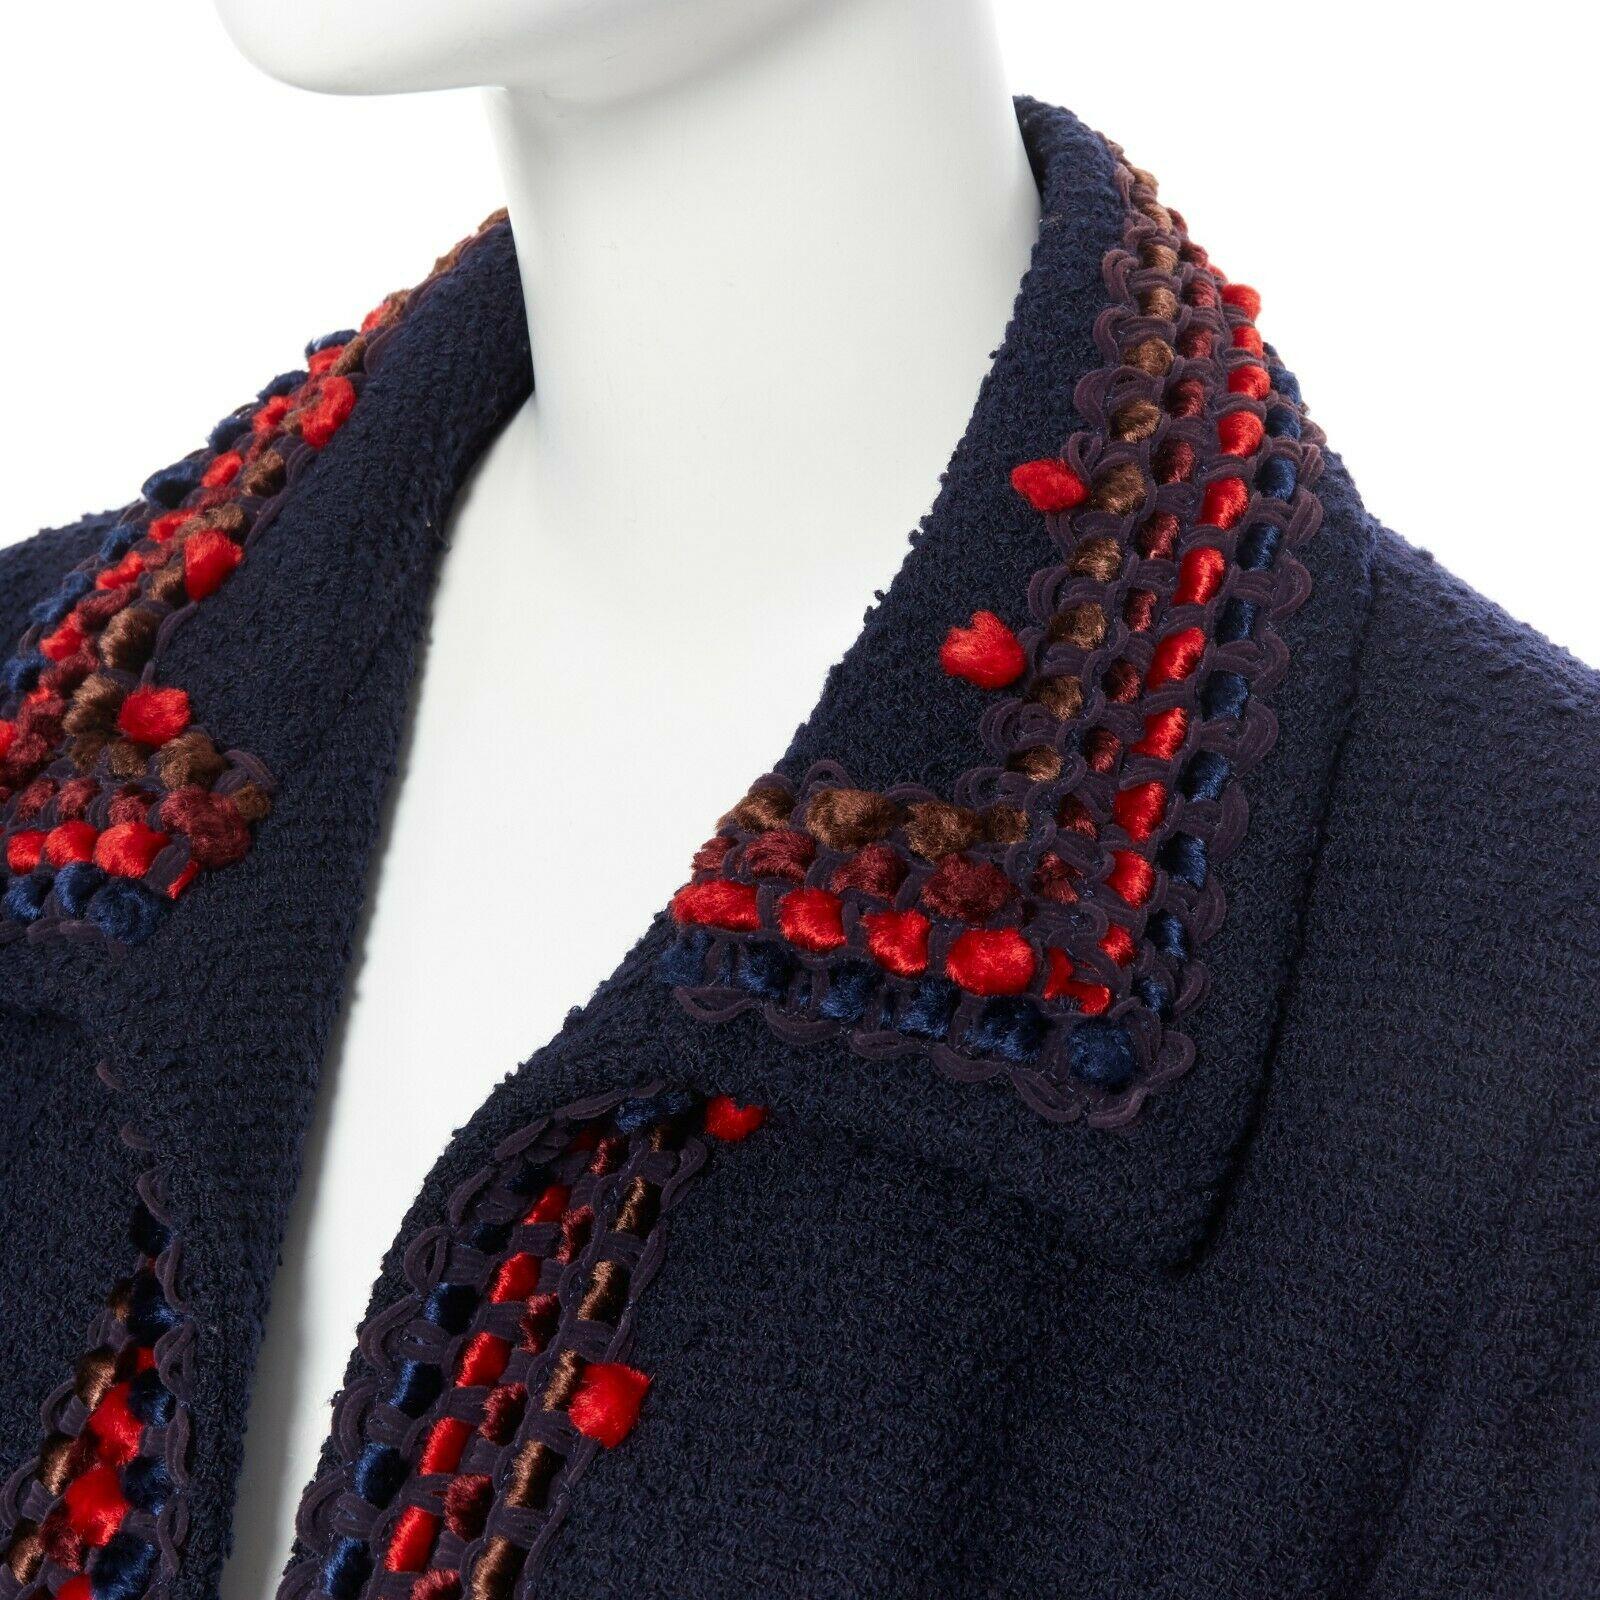 runway CHANEL 97A blue wool tweed multicolor pom-pom adorned crop jacket FR44
Brand: CHANEL
Designer: Karl Lagerfeld
Collection: 97A
Model Name / Style: Tweed jacket
Material: Wool
Color: Navy with red decoratives
Pattern: Solid
Lining material: